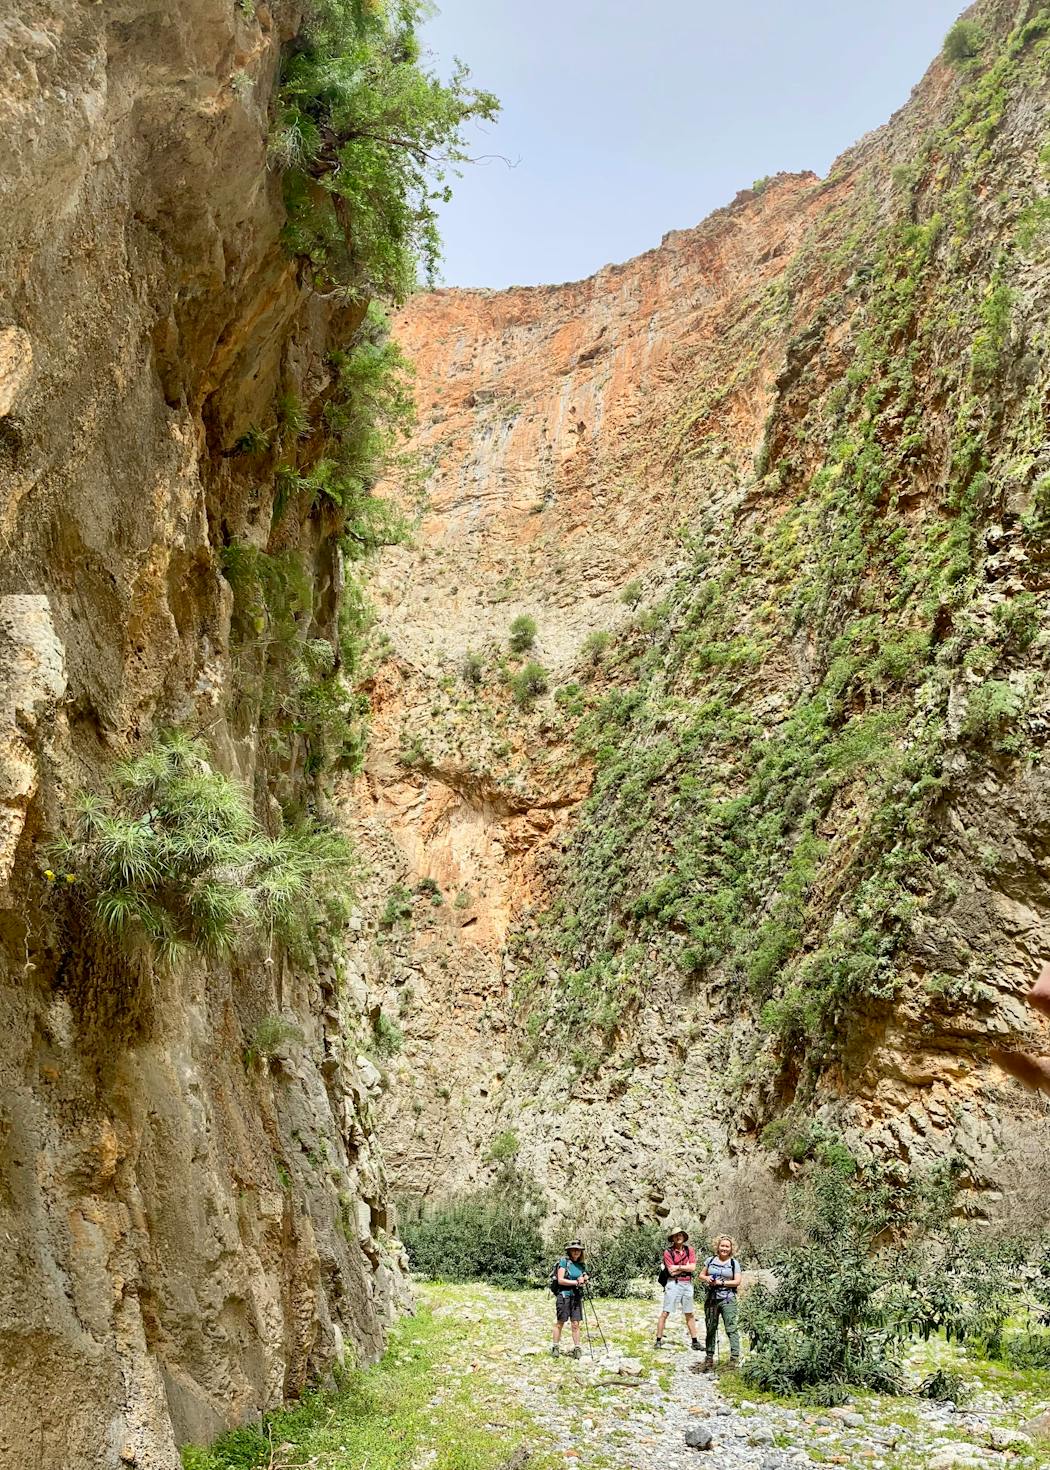 Hiking on Crete featured numerous gorges and rock formations.